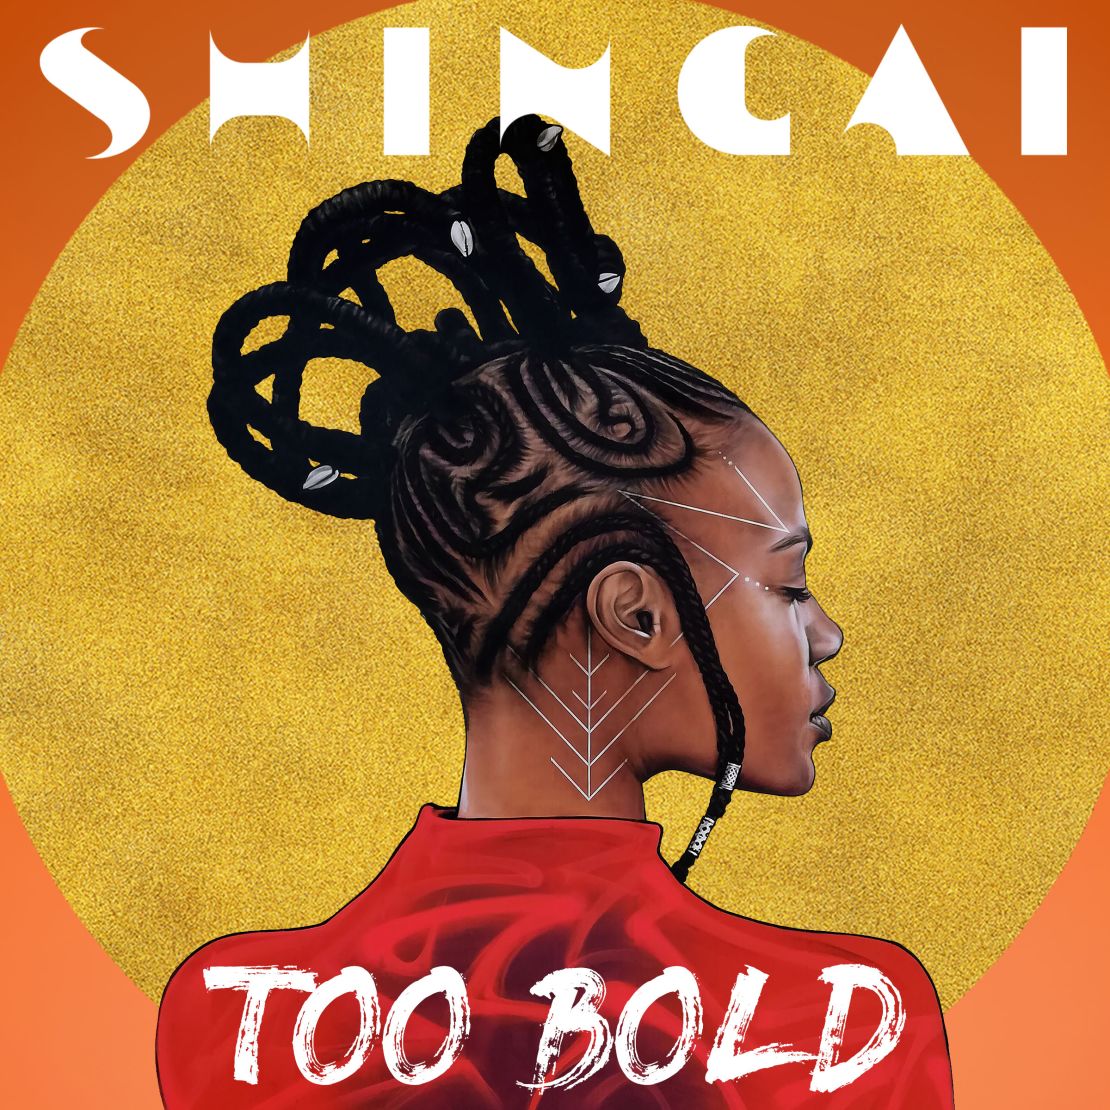 Shingai's debut album "Too Bold" releases this week.